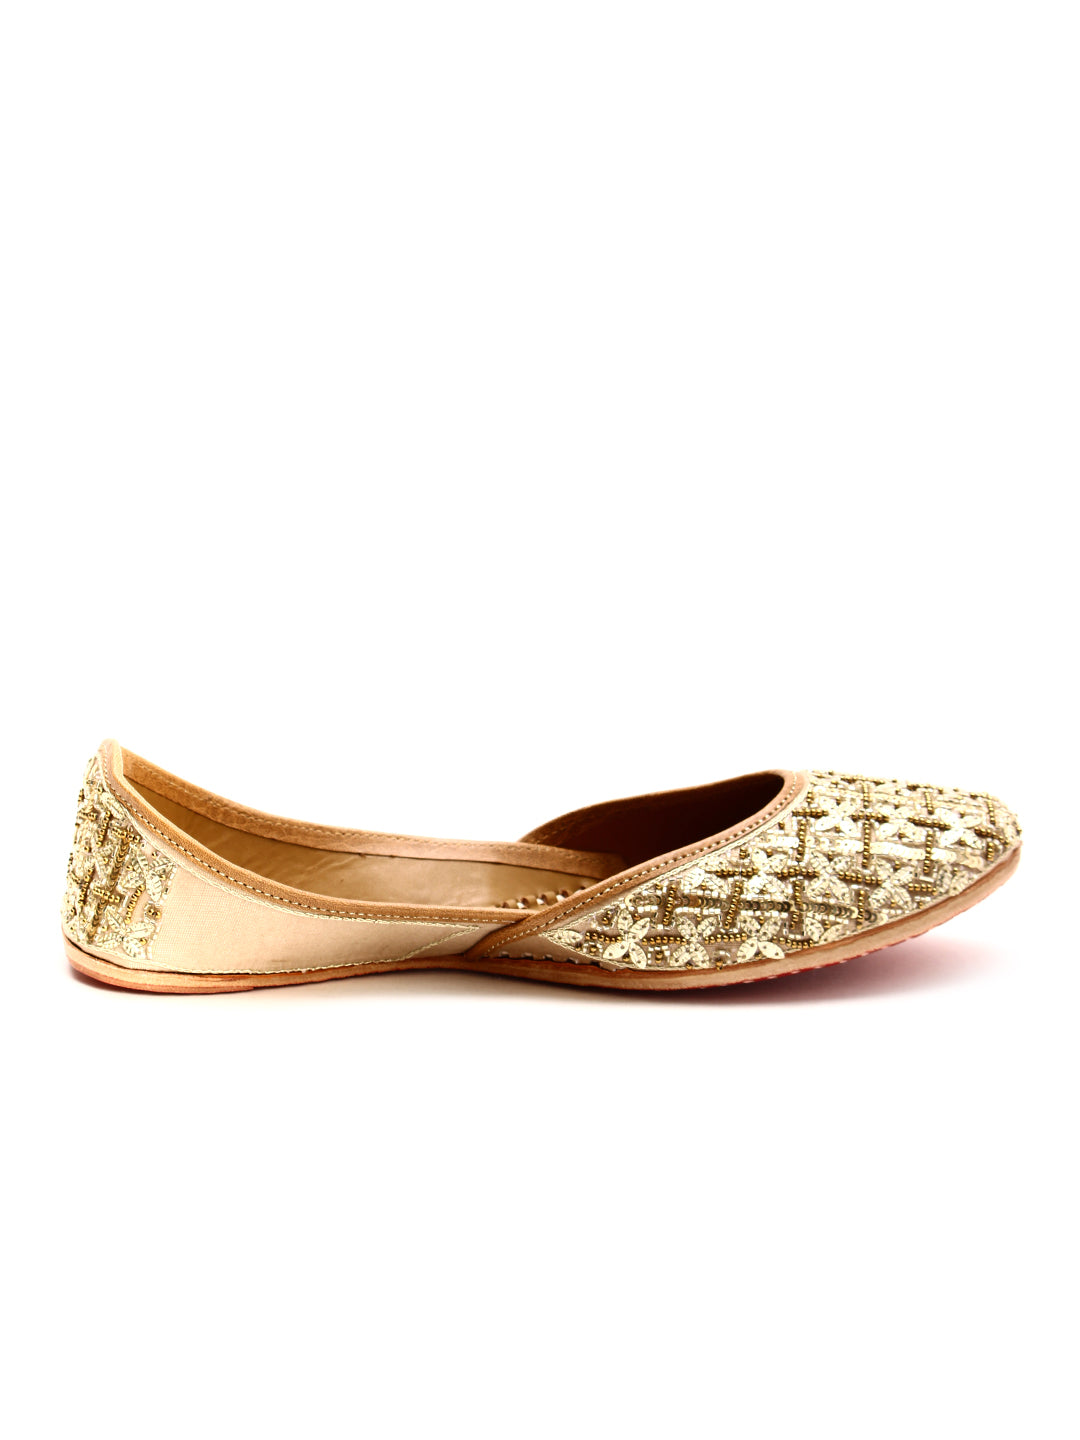 Elevate Your Ethnic Ensemble: Handcrafted Punjabi Juttis for Ladies at Delco Shoes